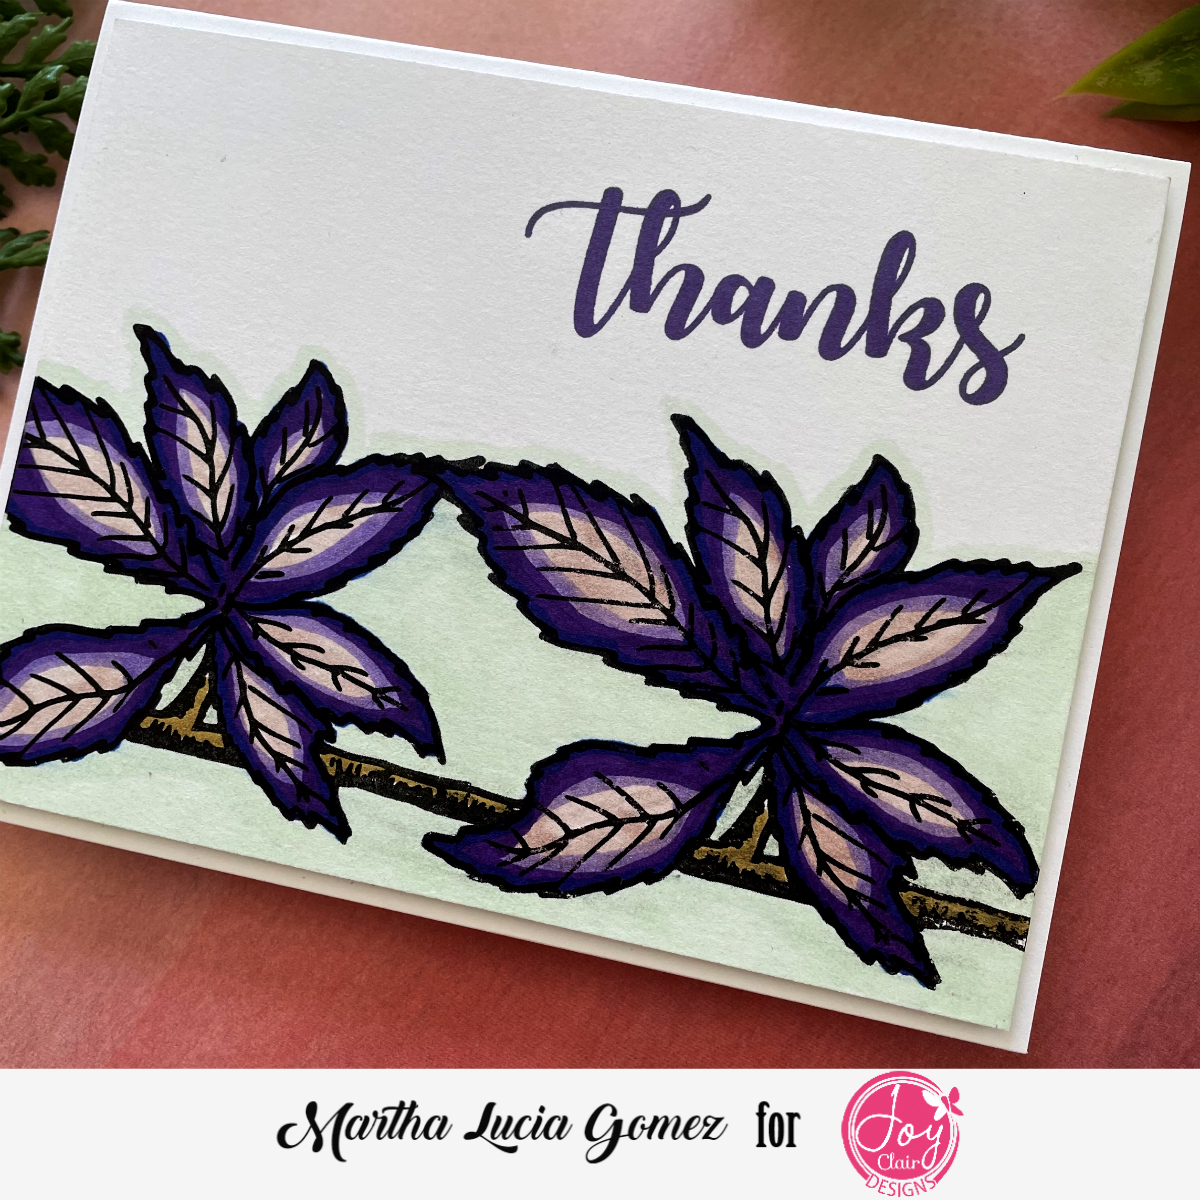 Easy Thank You Card